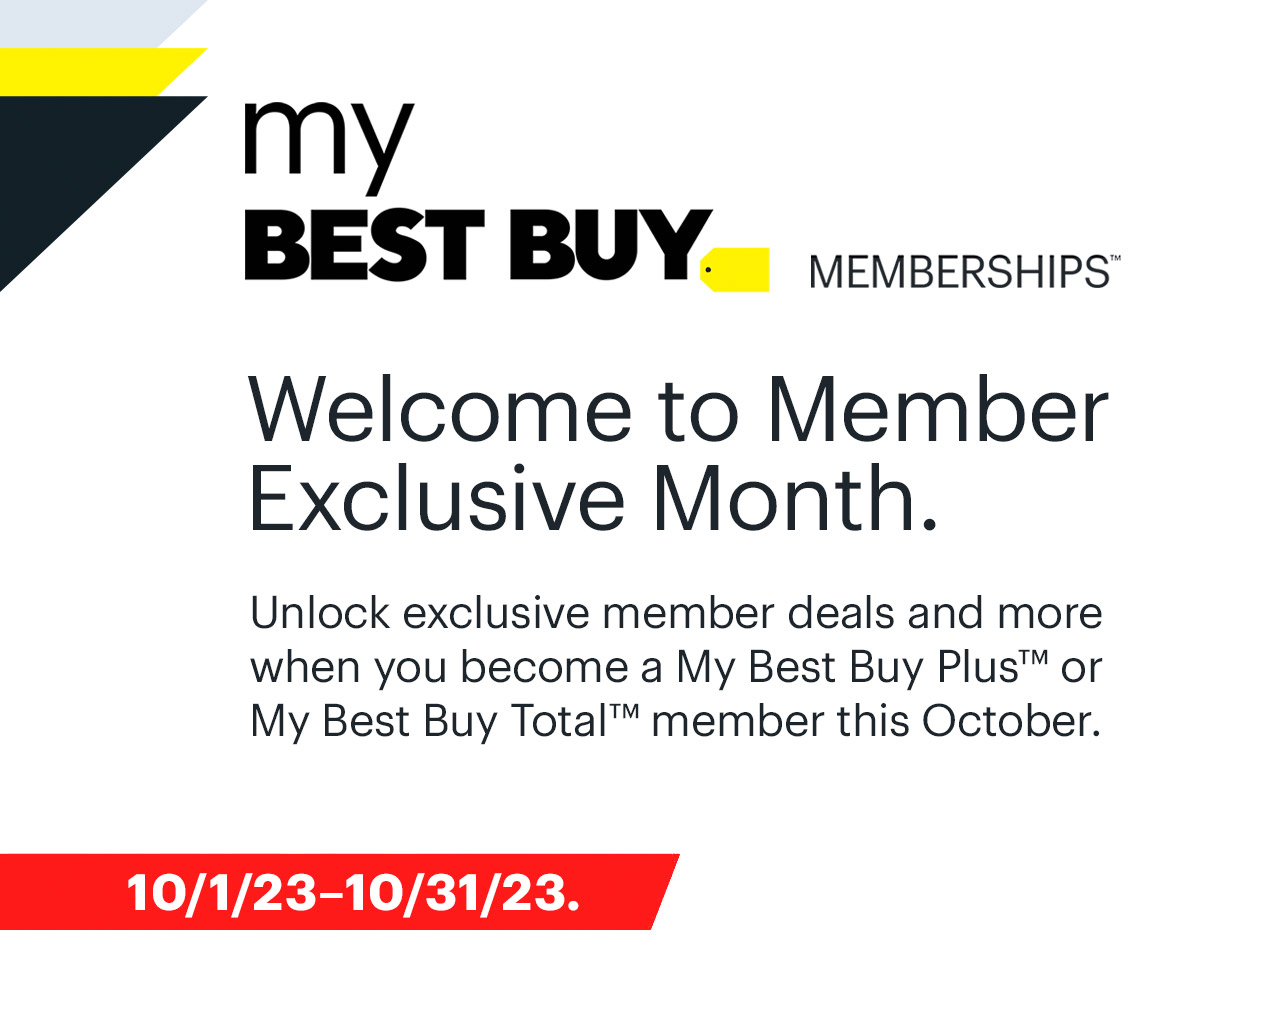 Welcome to Member Exclusive Month. Unlock exclusive member deals and more when you become a My Best Buy Plus™ or My Best Buy Total™ member this October.